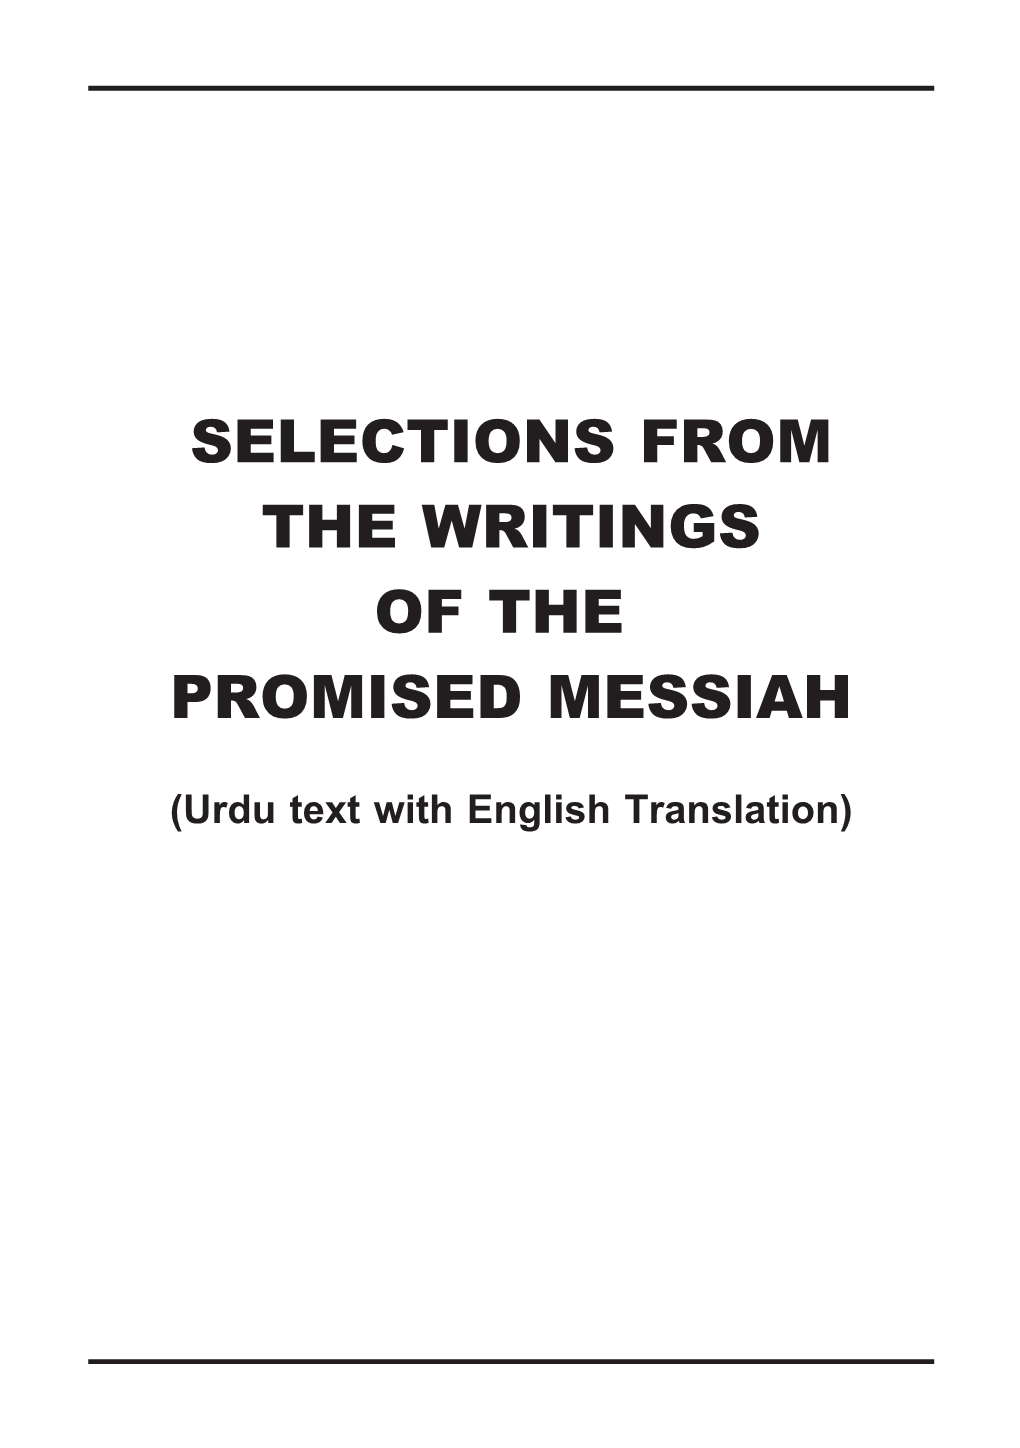 Selected Writings of the Promised Messiah